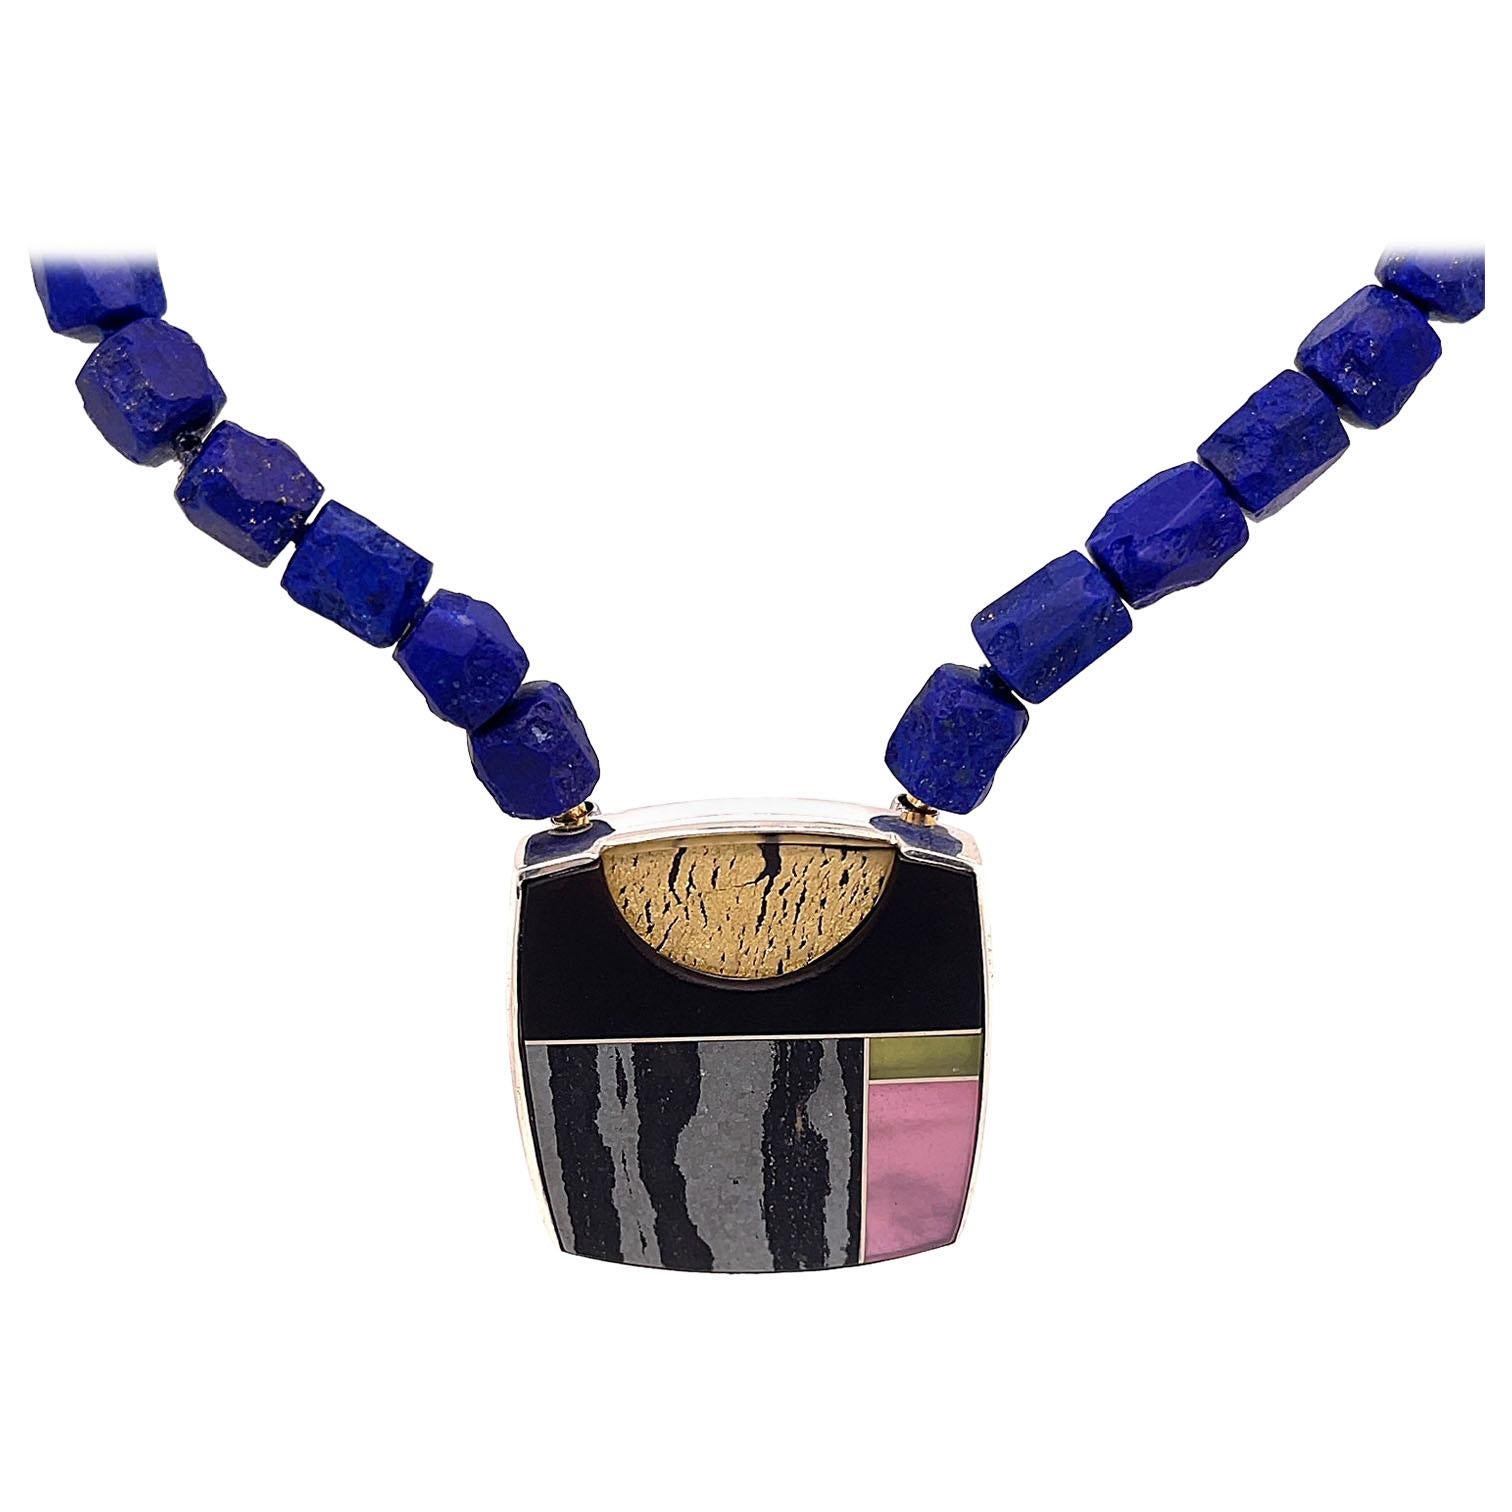 156 Carat Lapis Lazuli Necklace with a "Steve Walters" Sterling Silver Clasp